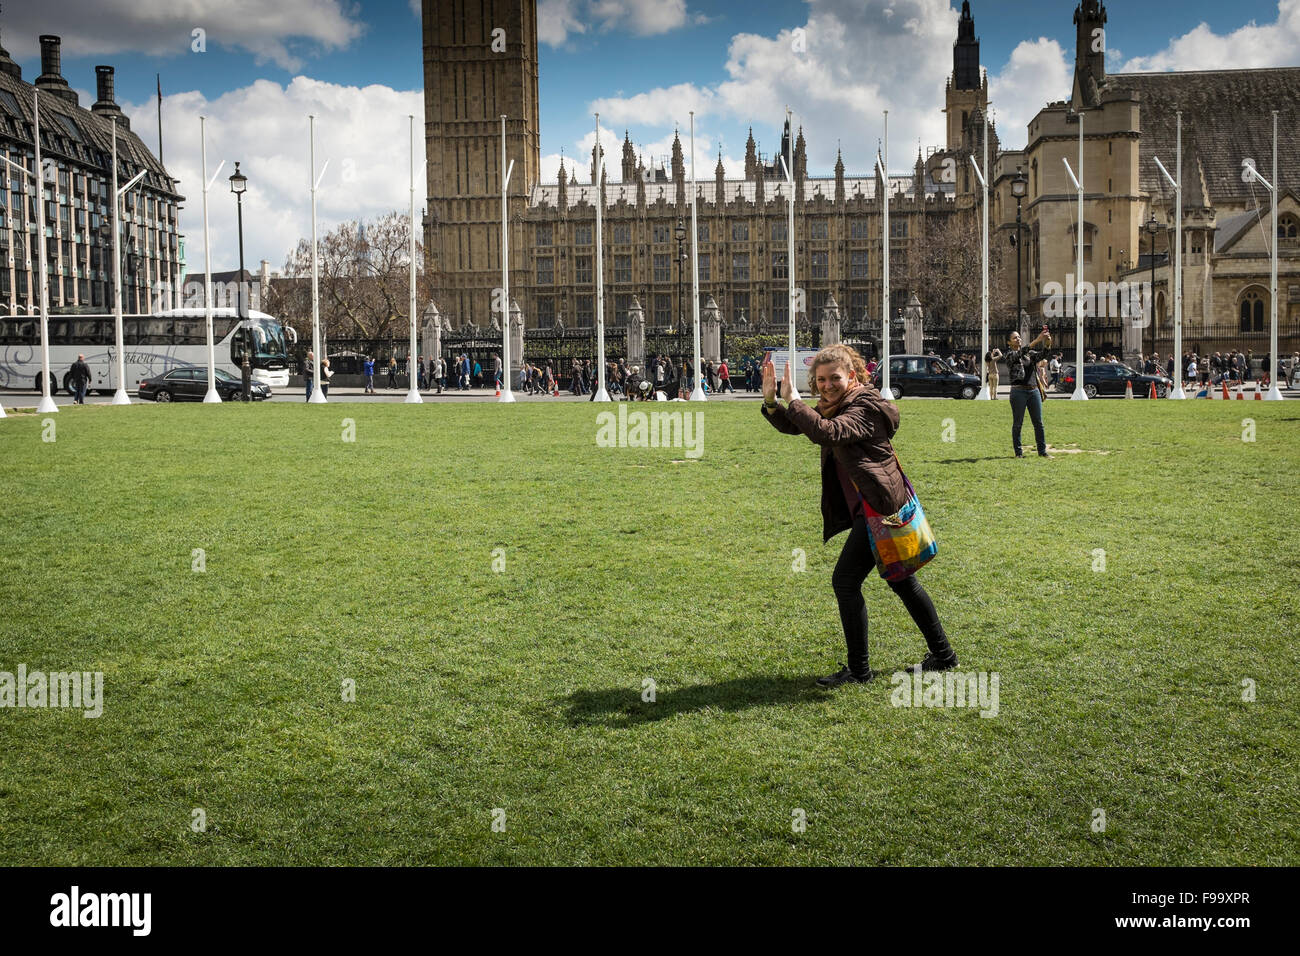 Tourists taking photos in Parliament Square with House of Parliament in the background, London, UK Stock Photo